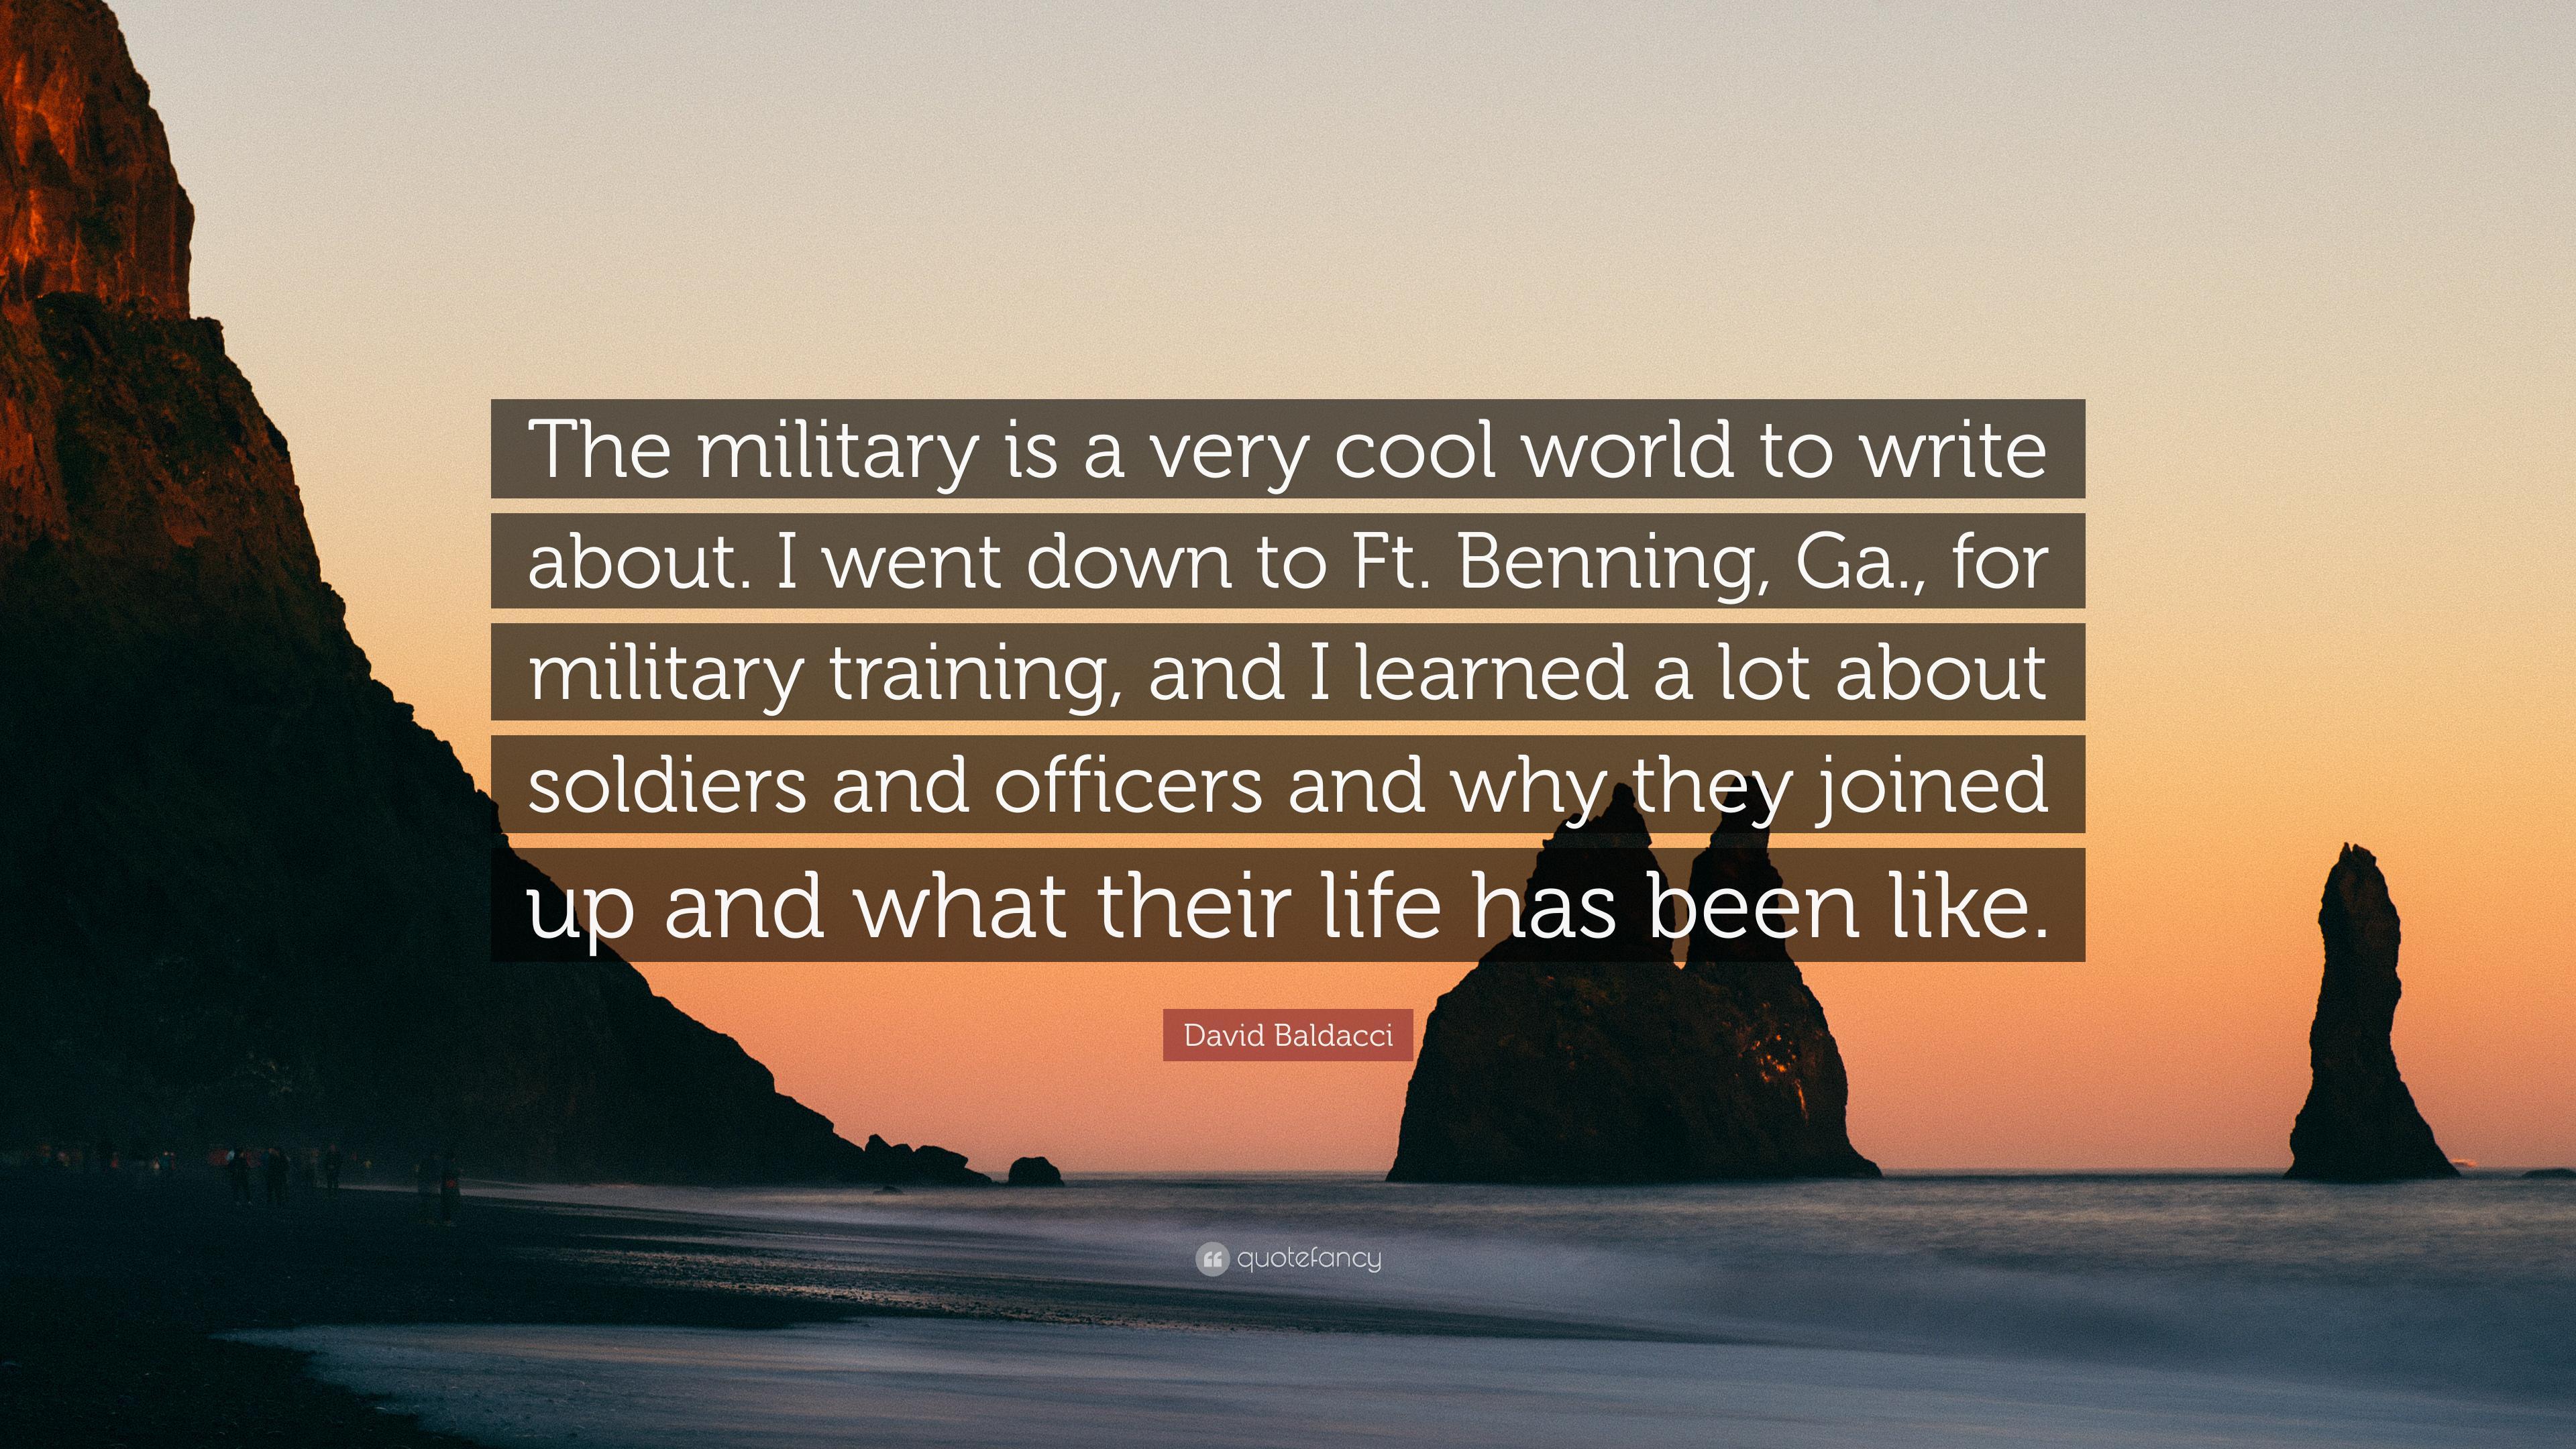 David Baldacci Quote: “The military is a very cool world to